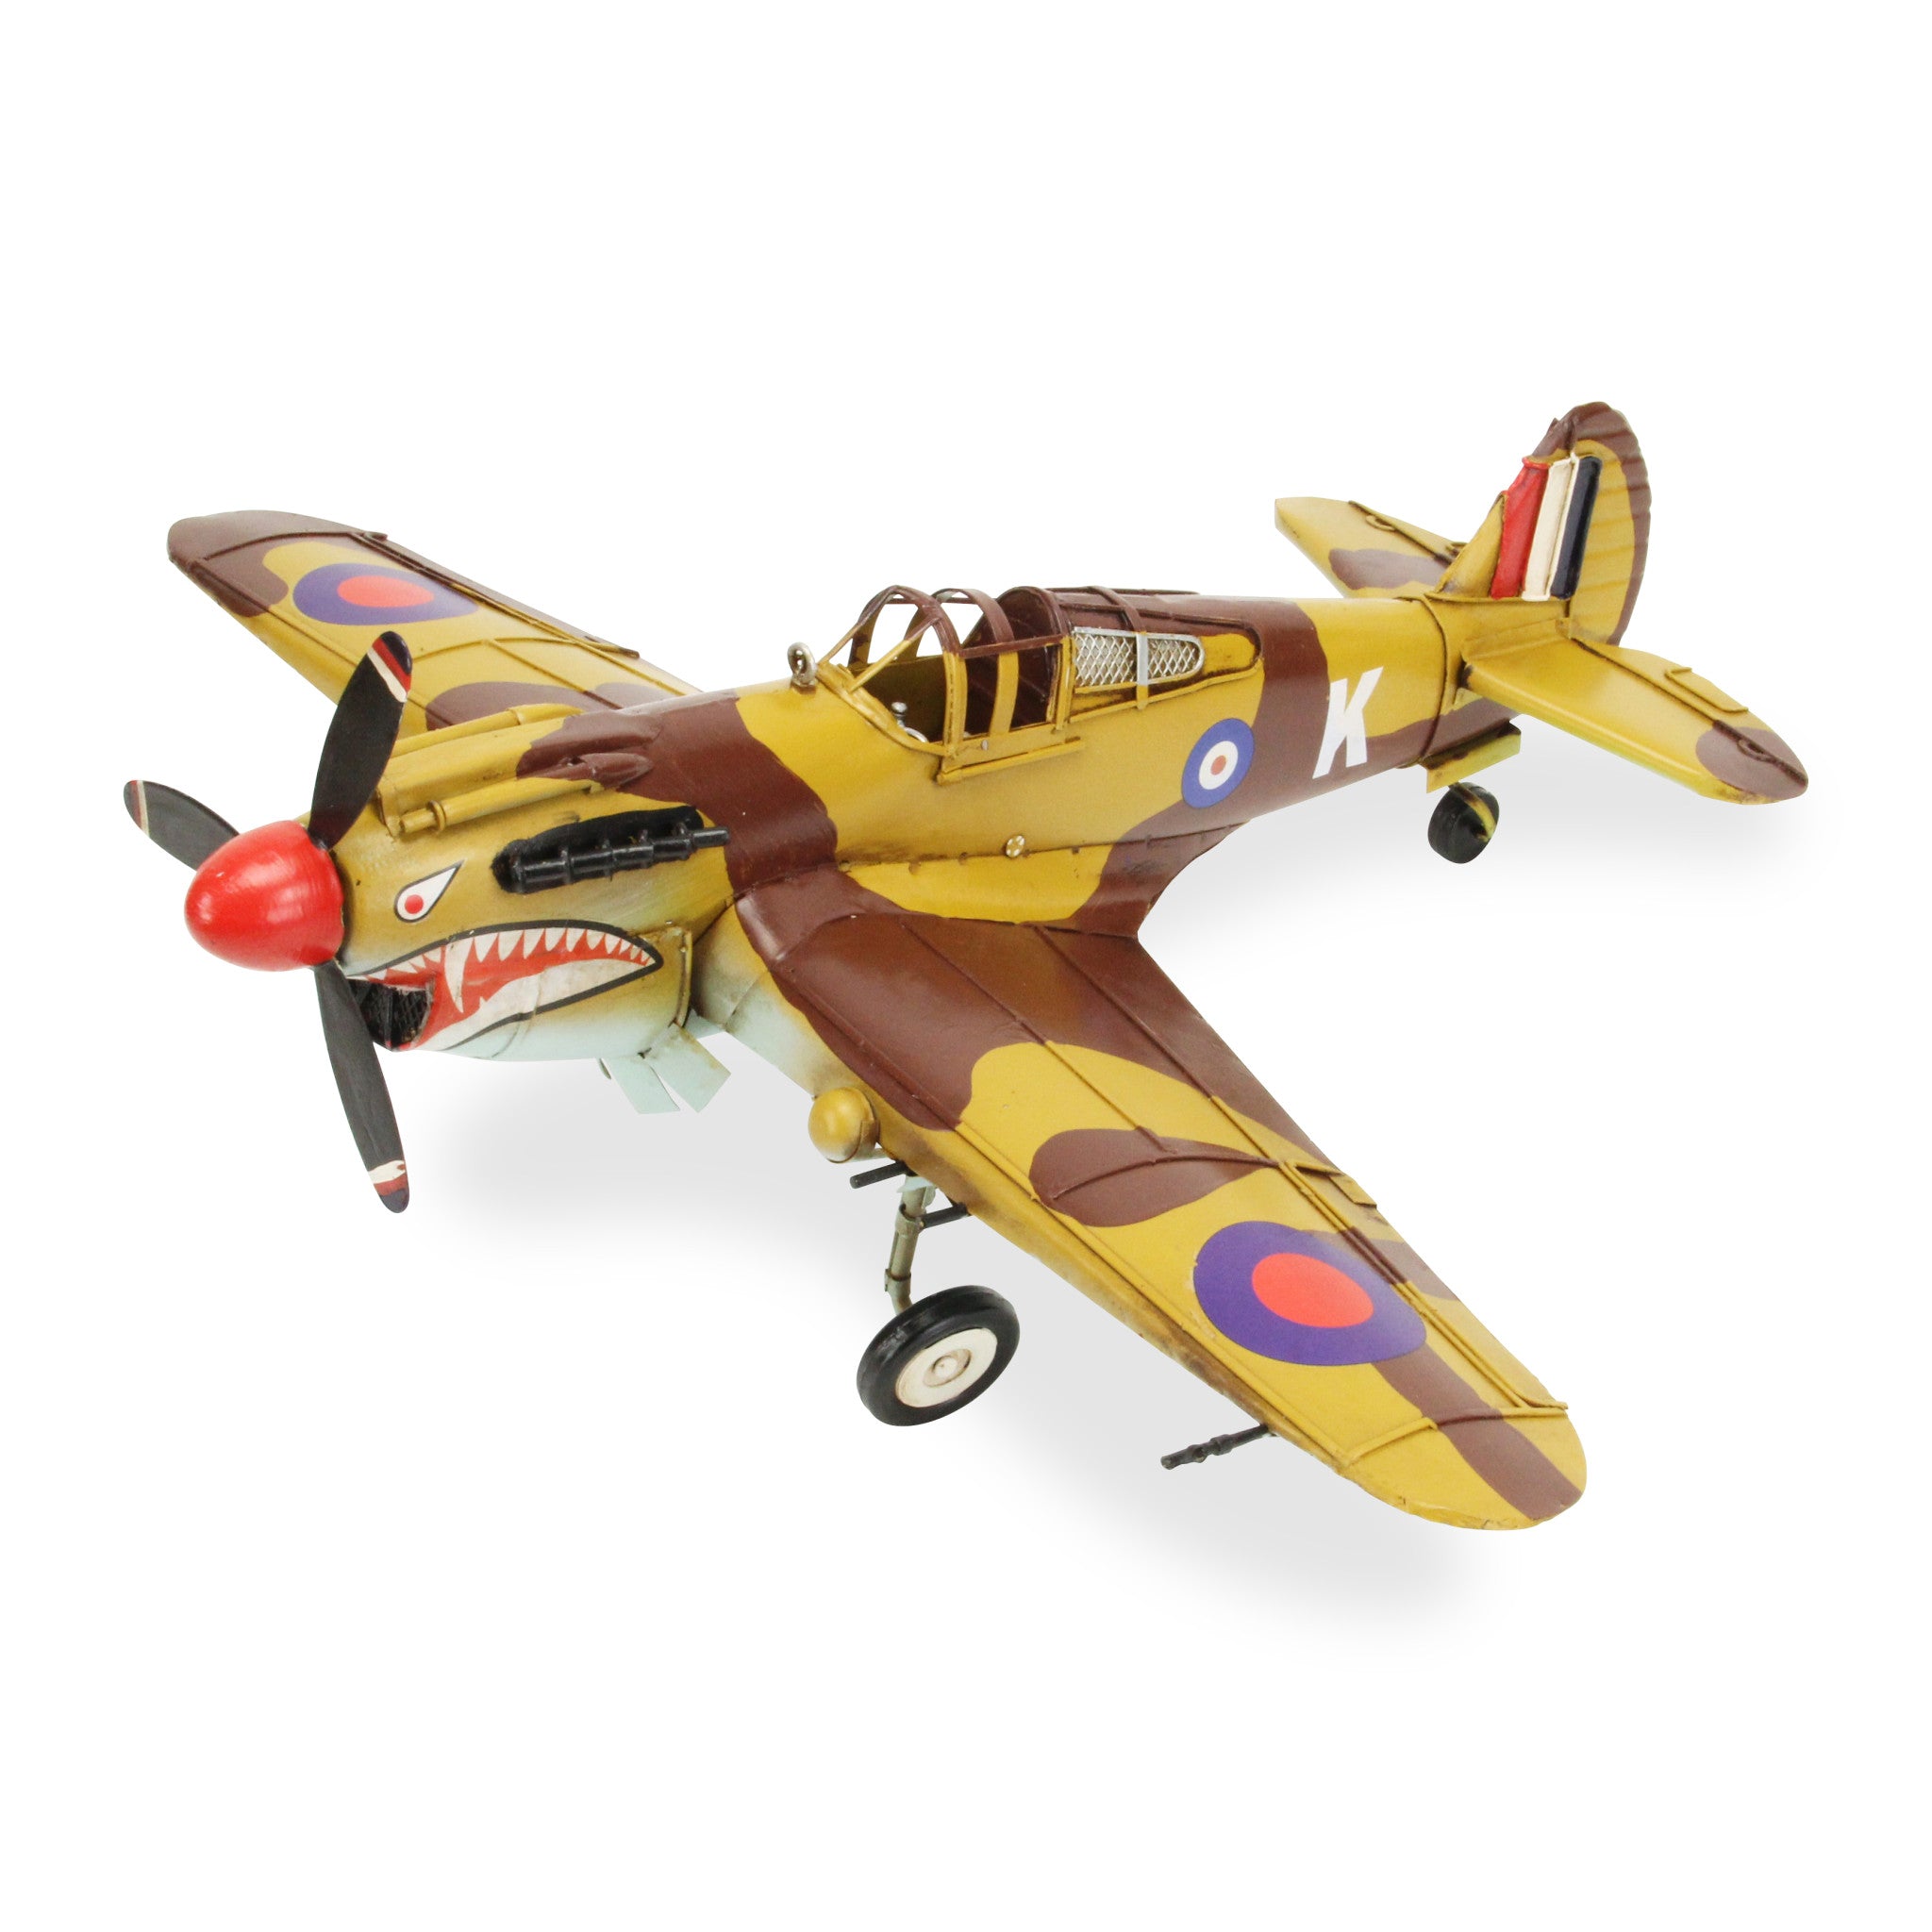 6" Yellow and Brown Metal Hand Painted Model Airplane